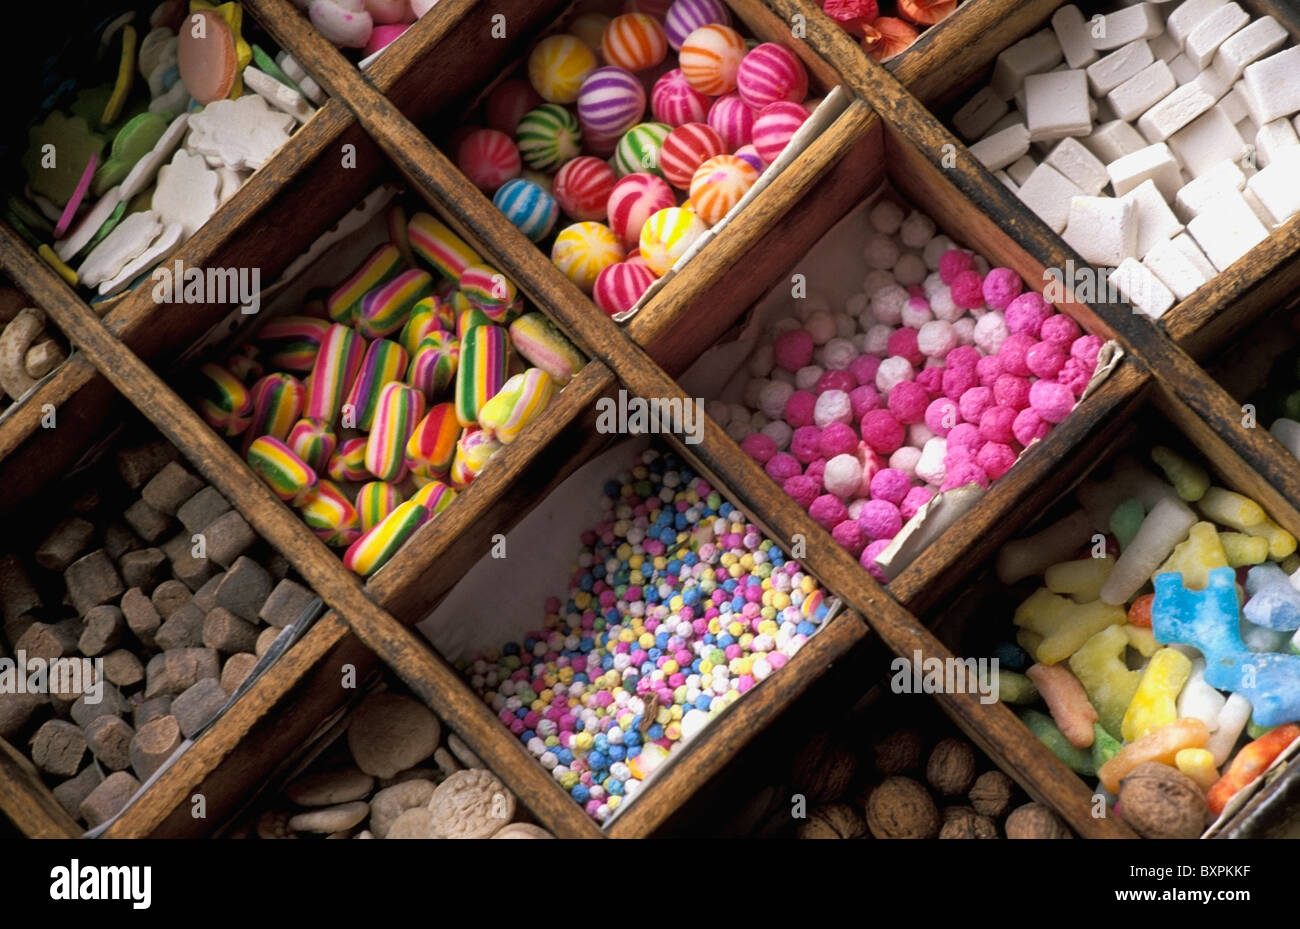 Sweets On Shelves At Witches Market, Close Up Stock Photo